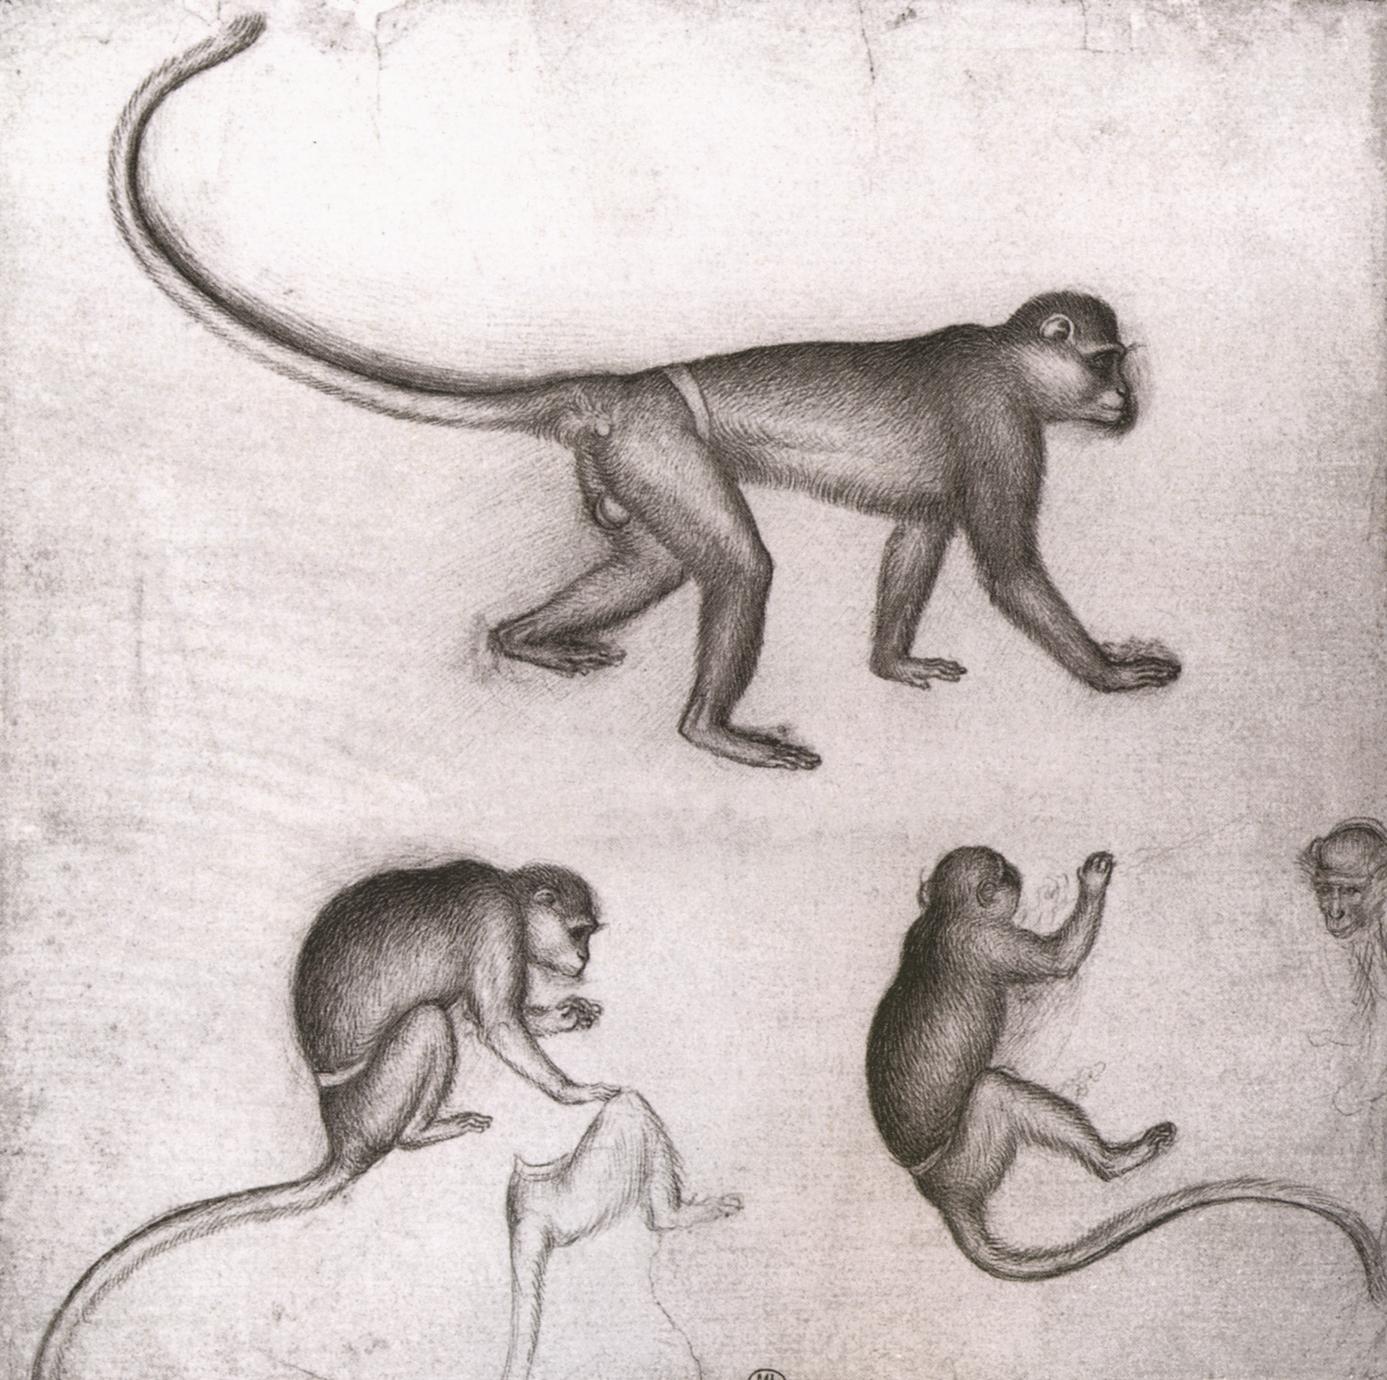 How To Draw A Baby Monkey, Step by Step, Drawing Guide, by Dawn - DragoArt